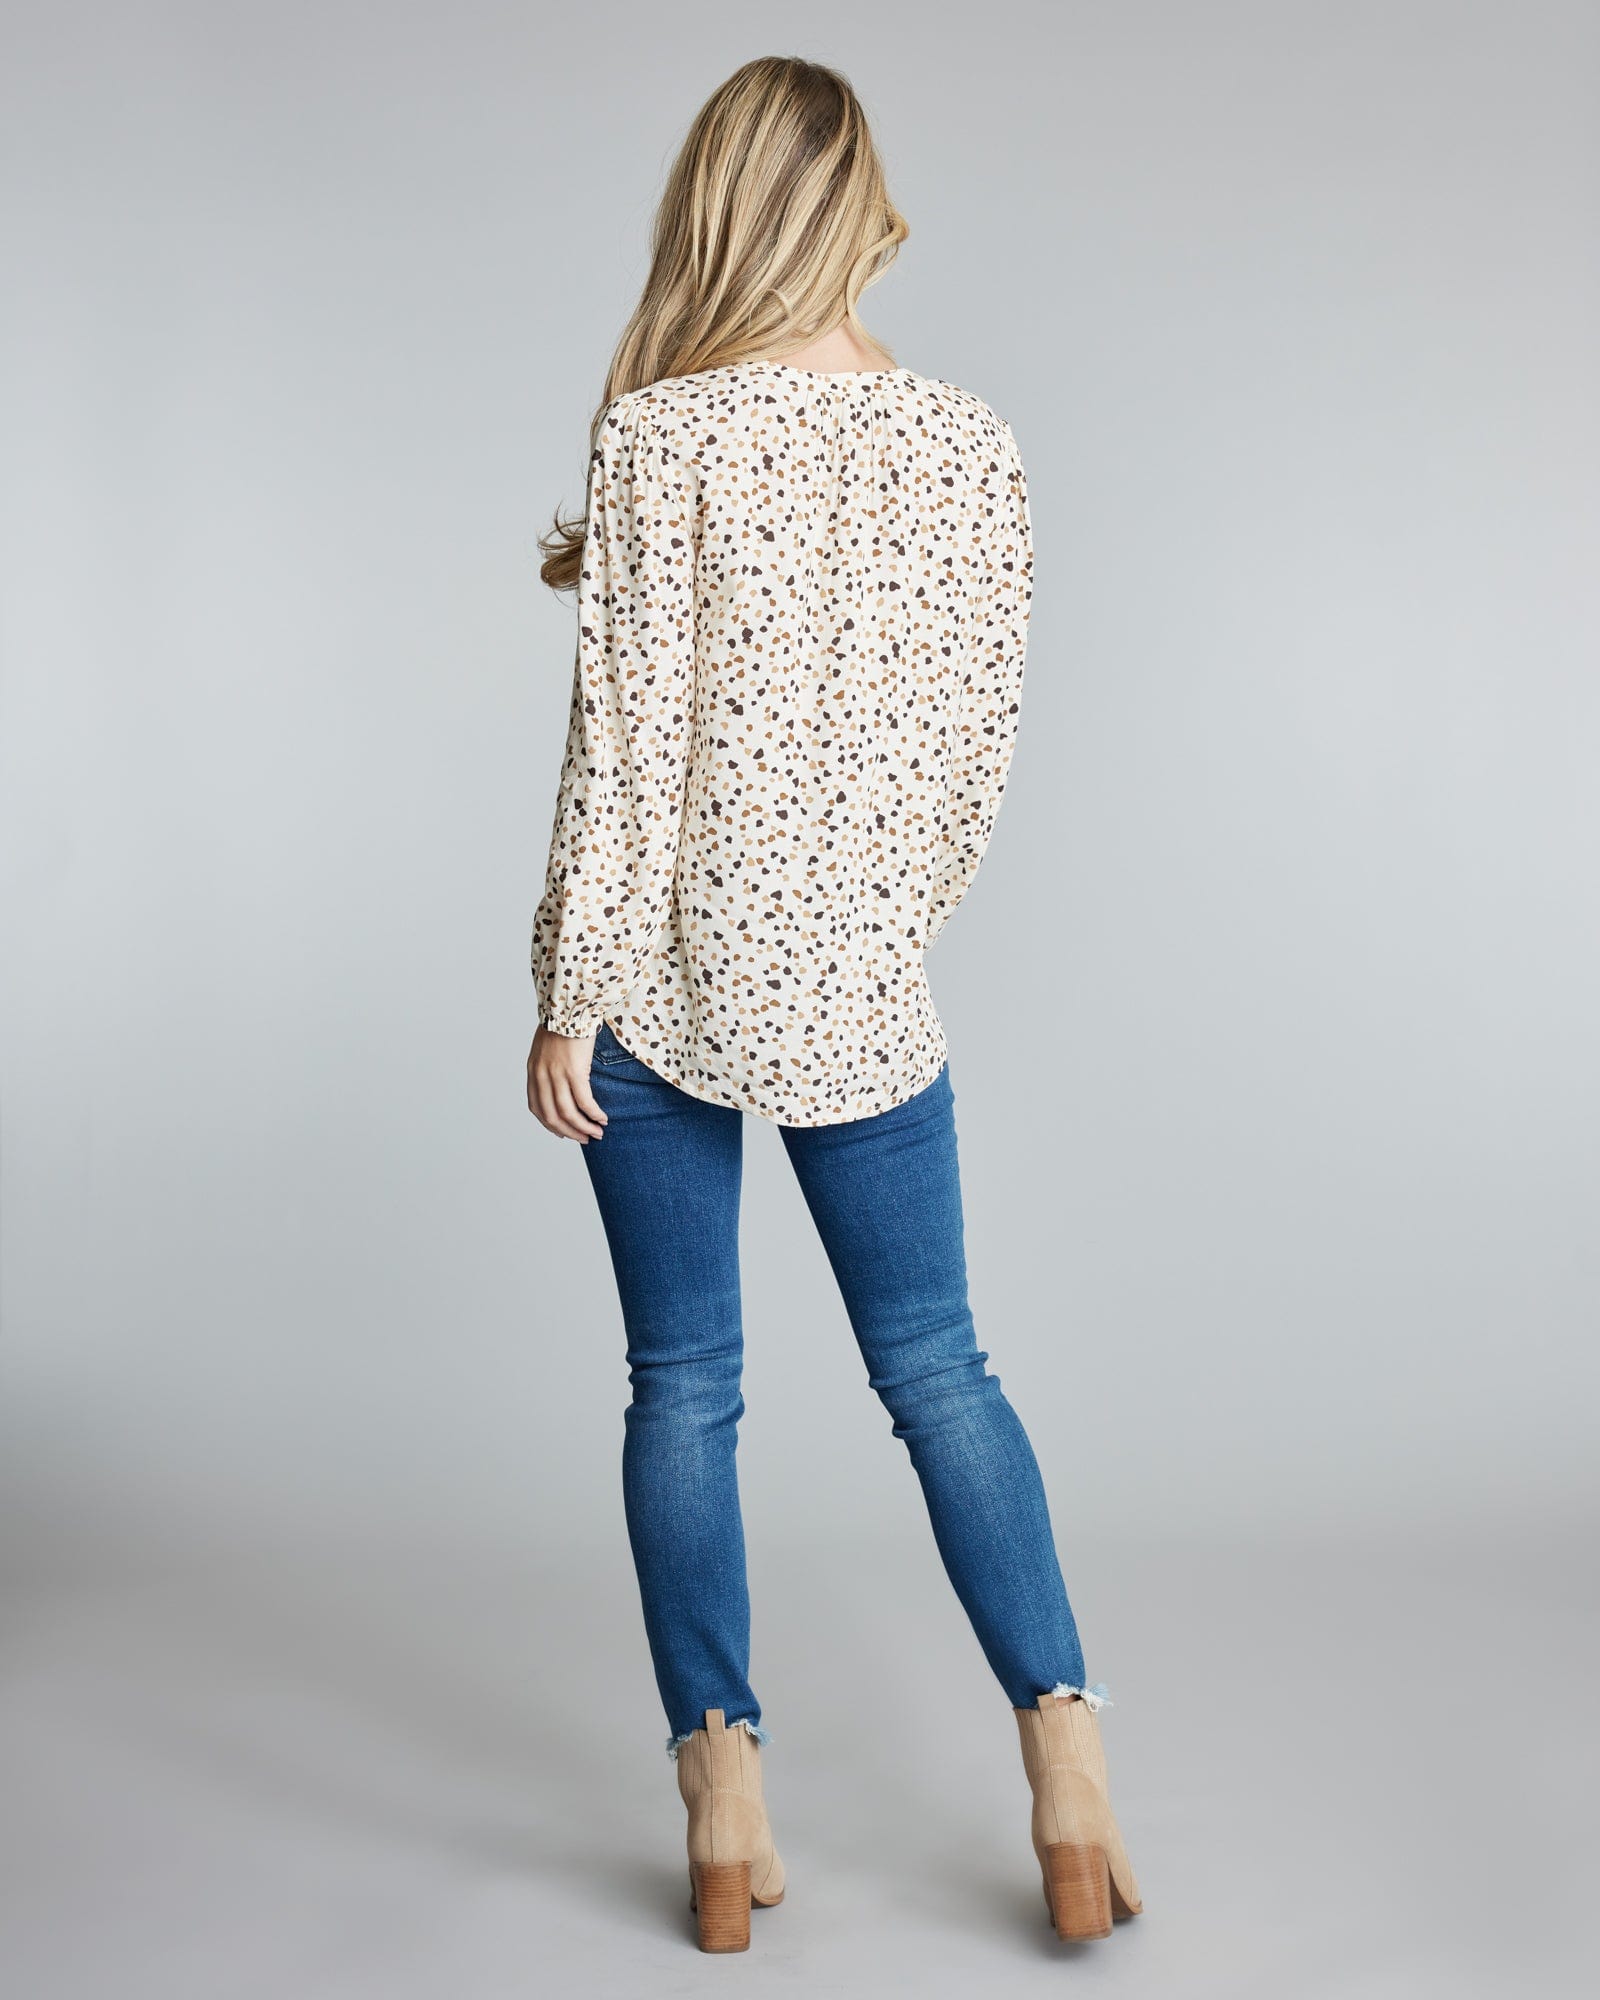 Woman in a long sleeve, polka dotted blouse